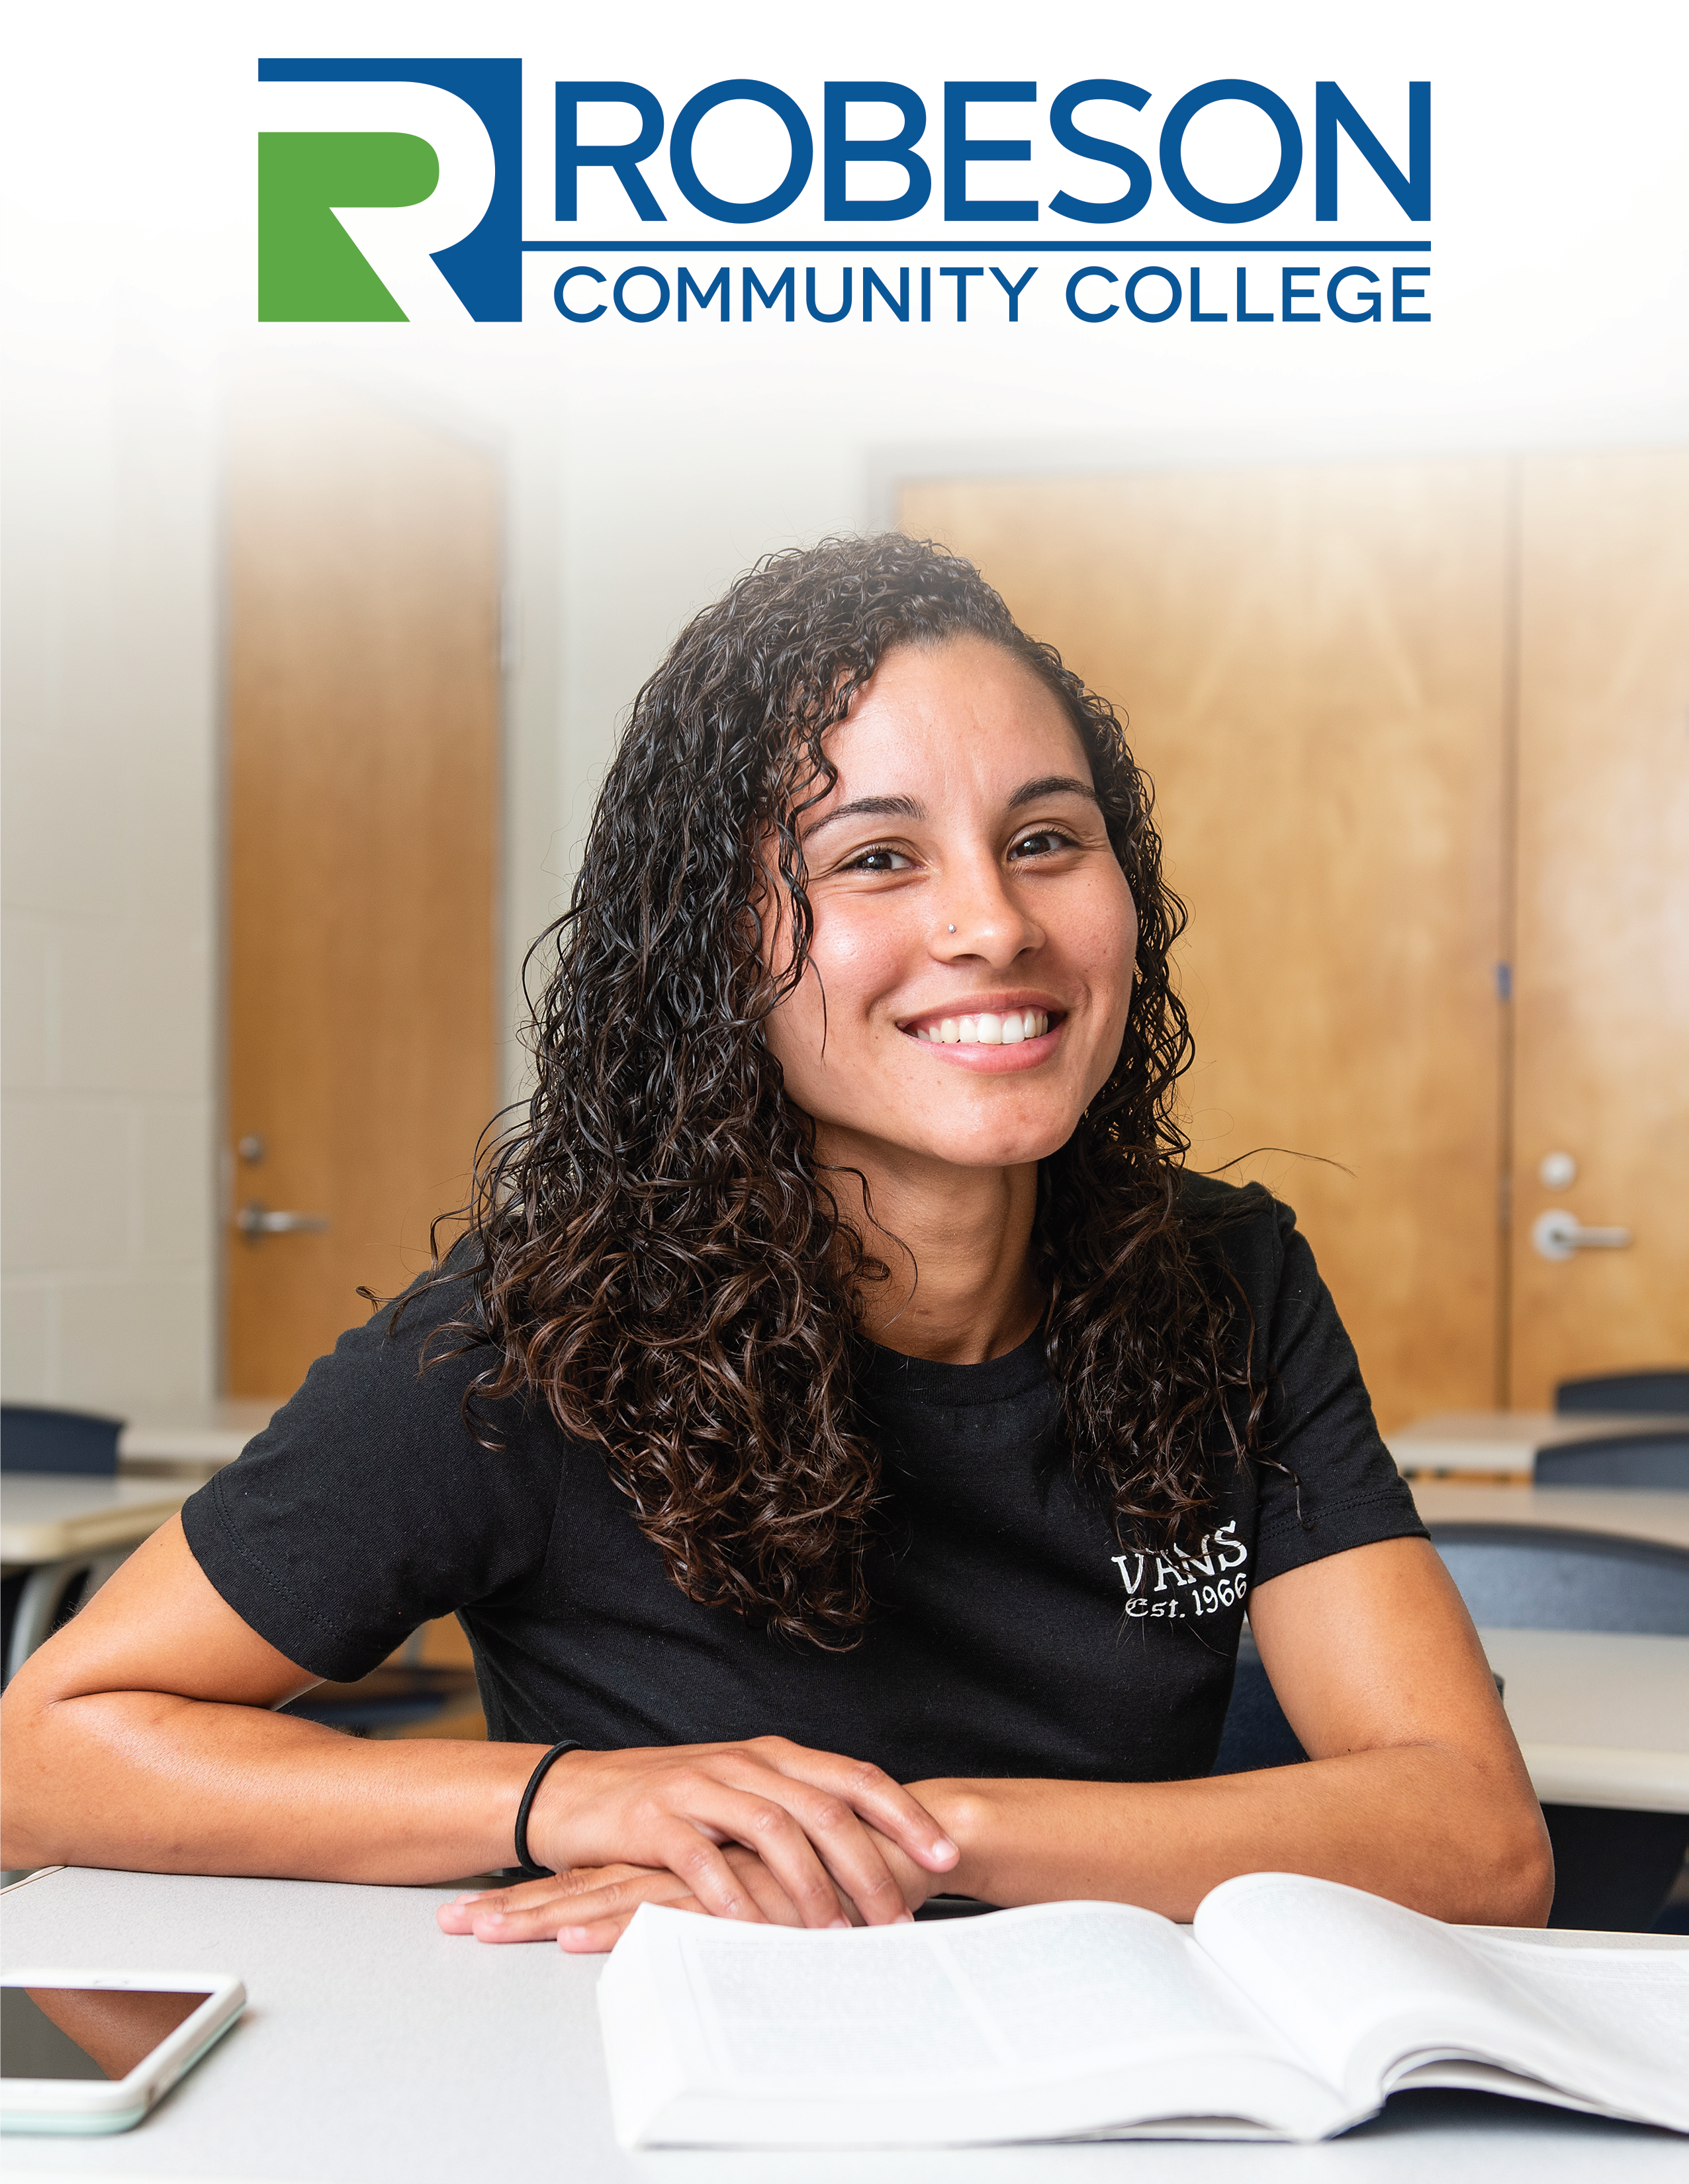 Robeson Community College Logo with printed text "2019-2020 Academic Catalog and Student Handbook" and image of a young, smiling female at a desk with an open text book.